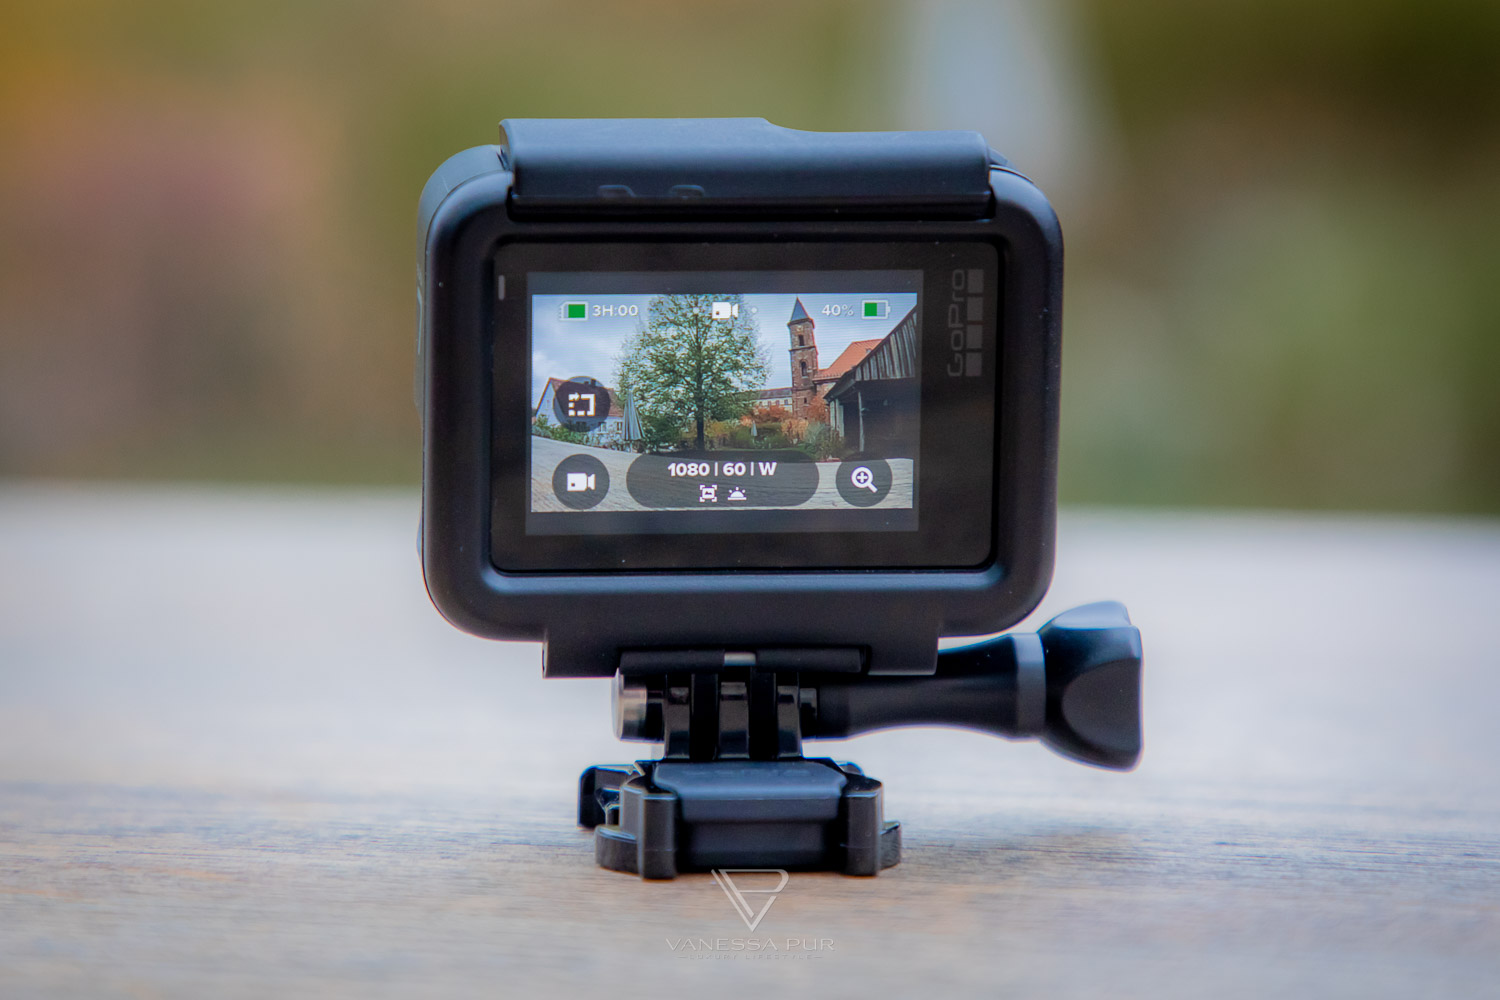 GoPro HERO7 black - Action camera and vlogging camera product review - Evaluation - Can you use the camera for vlogging? How good is the ActionCam - What is Hypersmooth